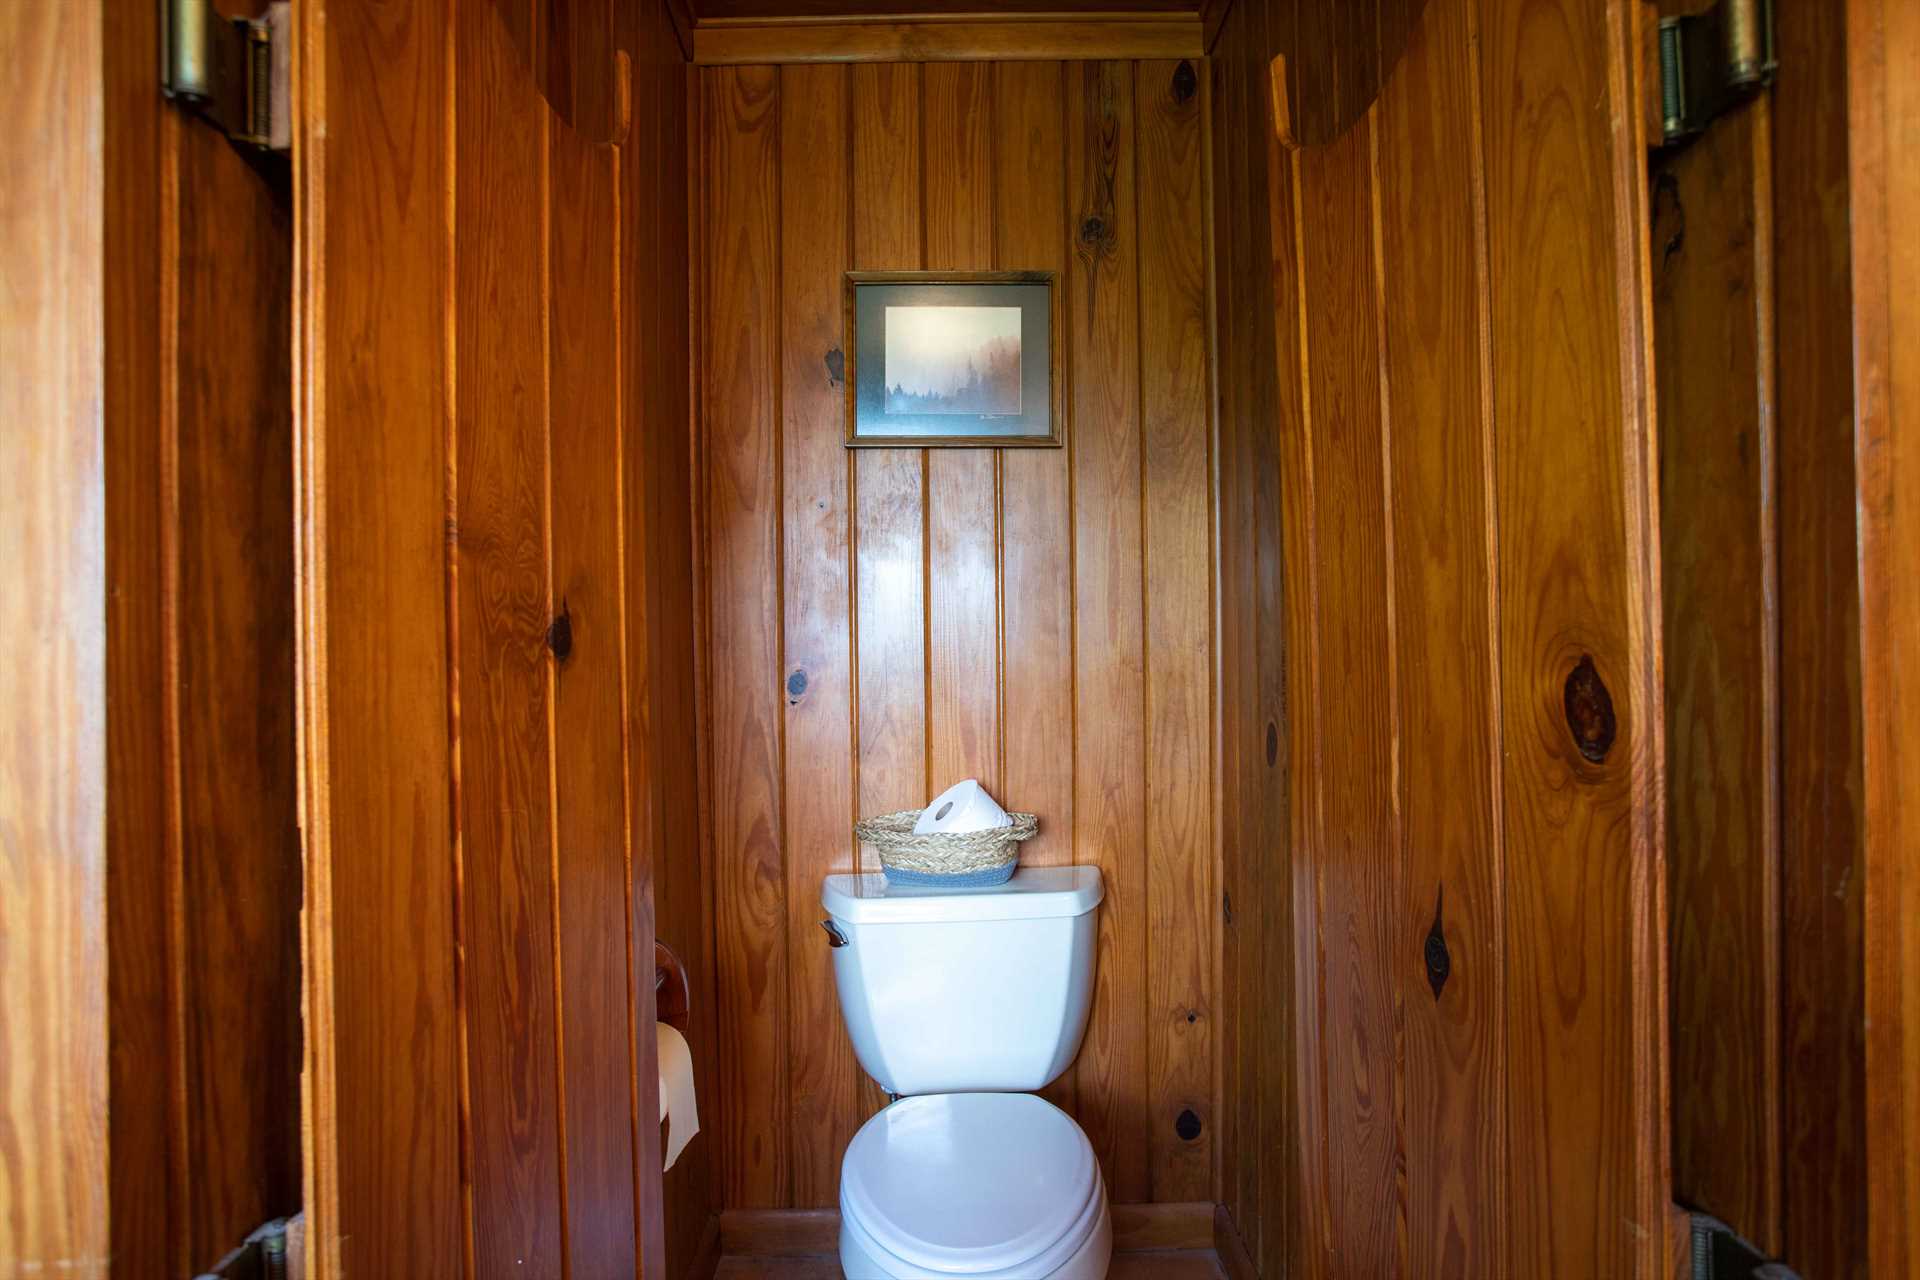                                                 A separate commode stall in the master bath provides extra privacy when needed.